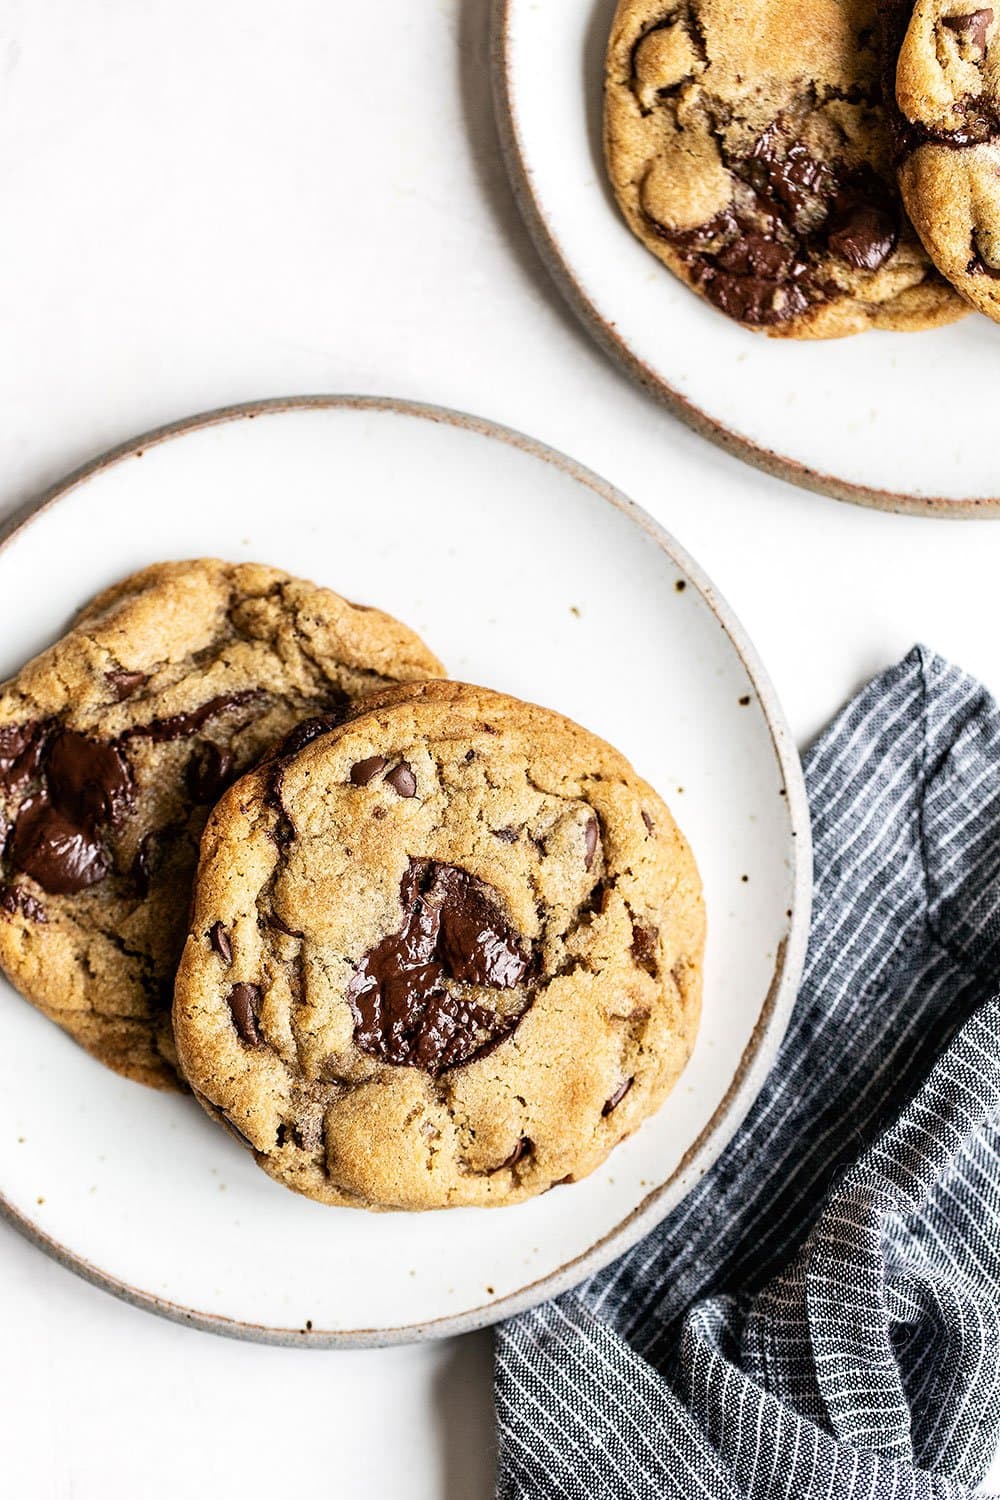 Two chocolate chip cookies on a plate with a cloth napkin